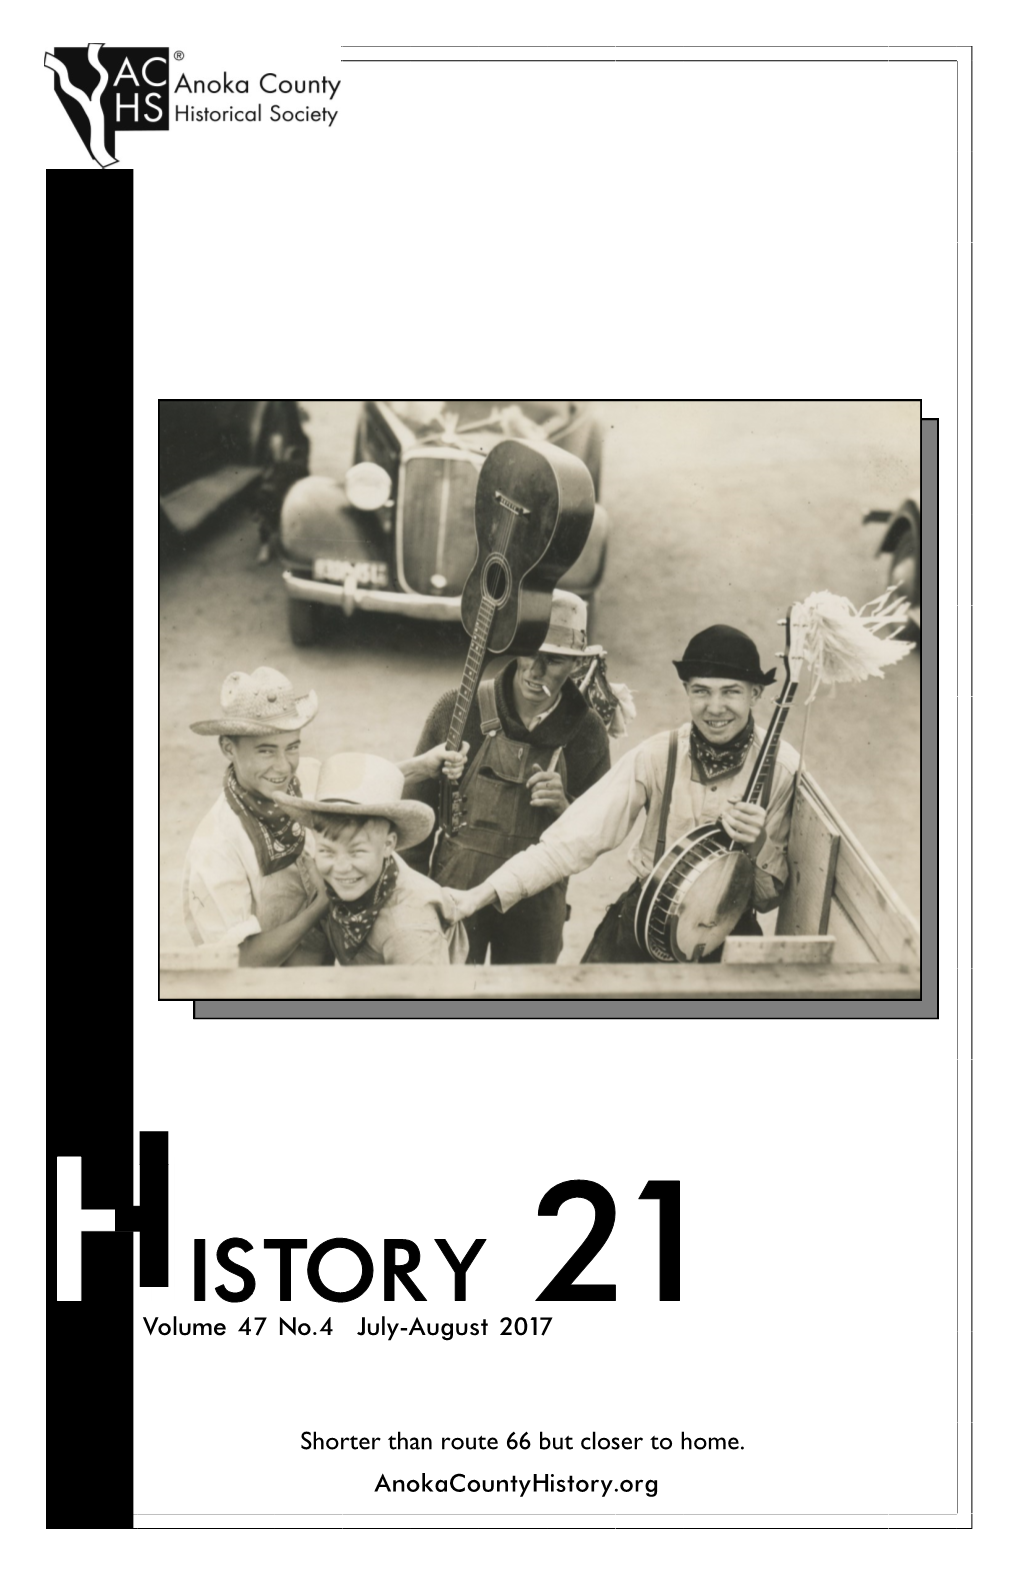 History 21 (In Honor of the 21 Cities in Anoka County) Is Published by the Anoka County Historical Society Six Times Yearly As a Member Benefit